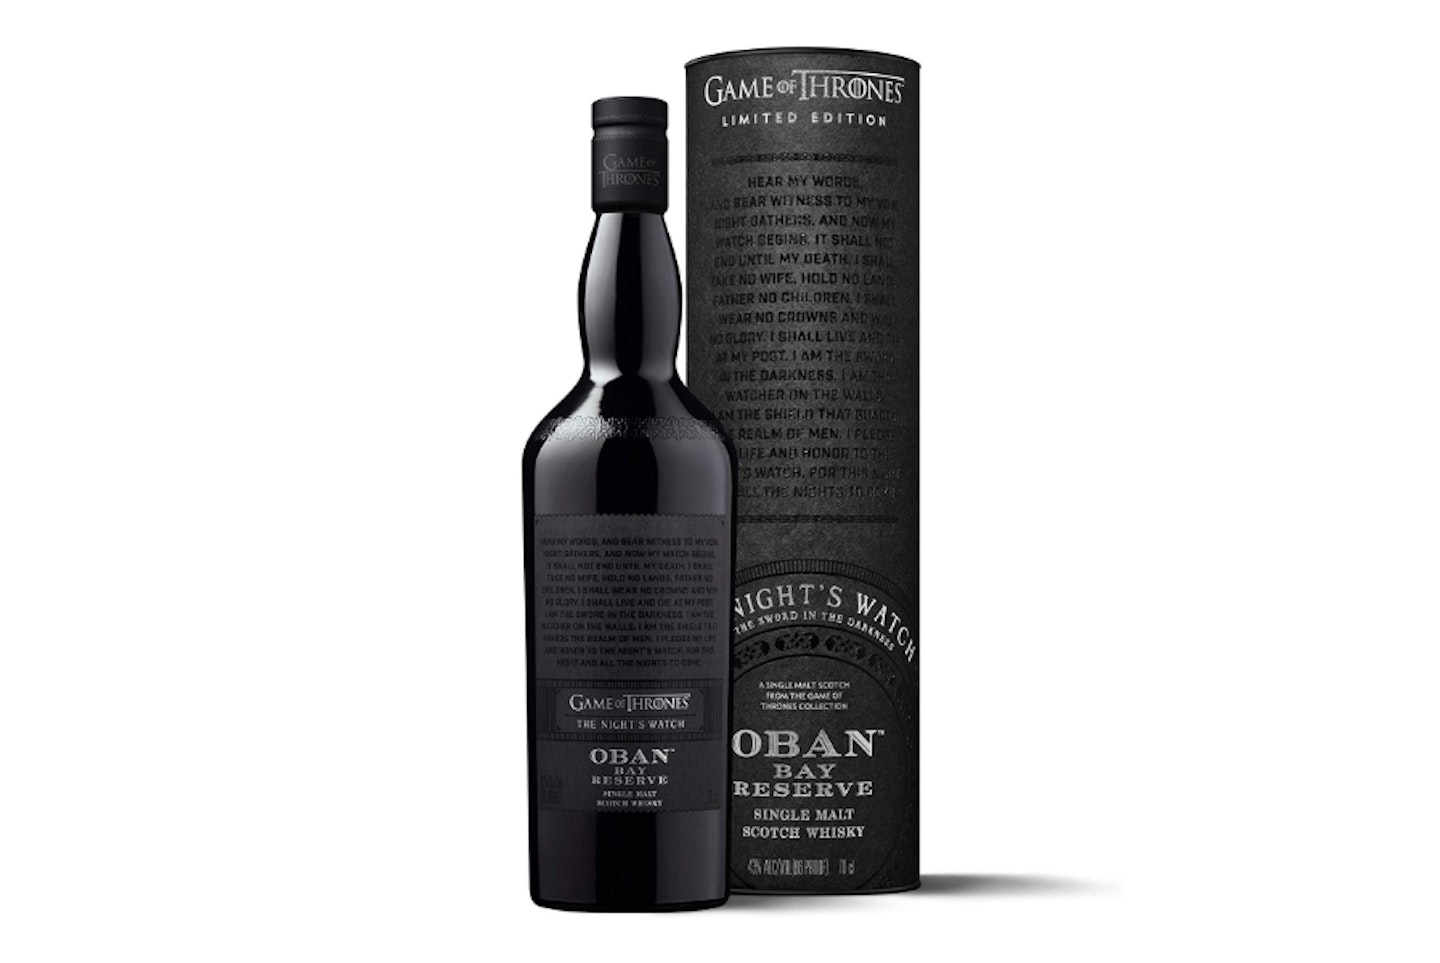 Game of Thrones The Nightu2019s Watch – Oban Bay Reserve, 700cl, 43%, £55.32